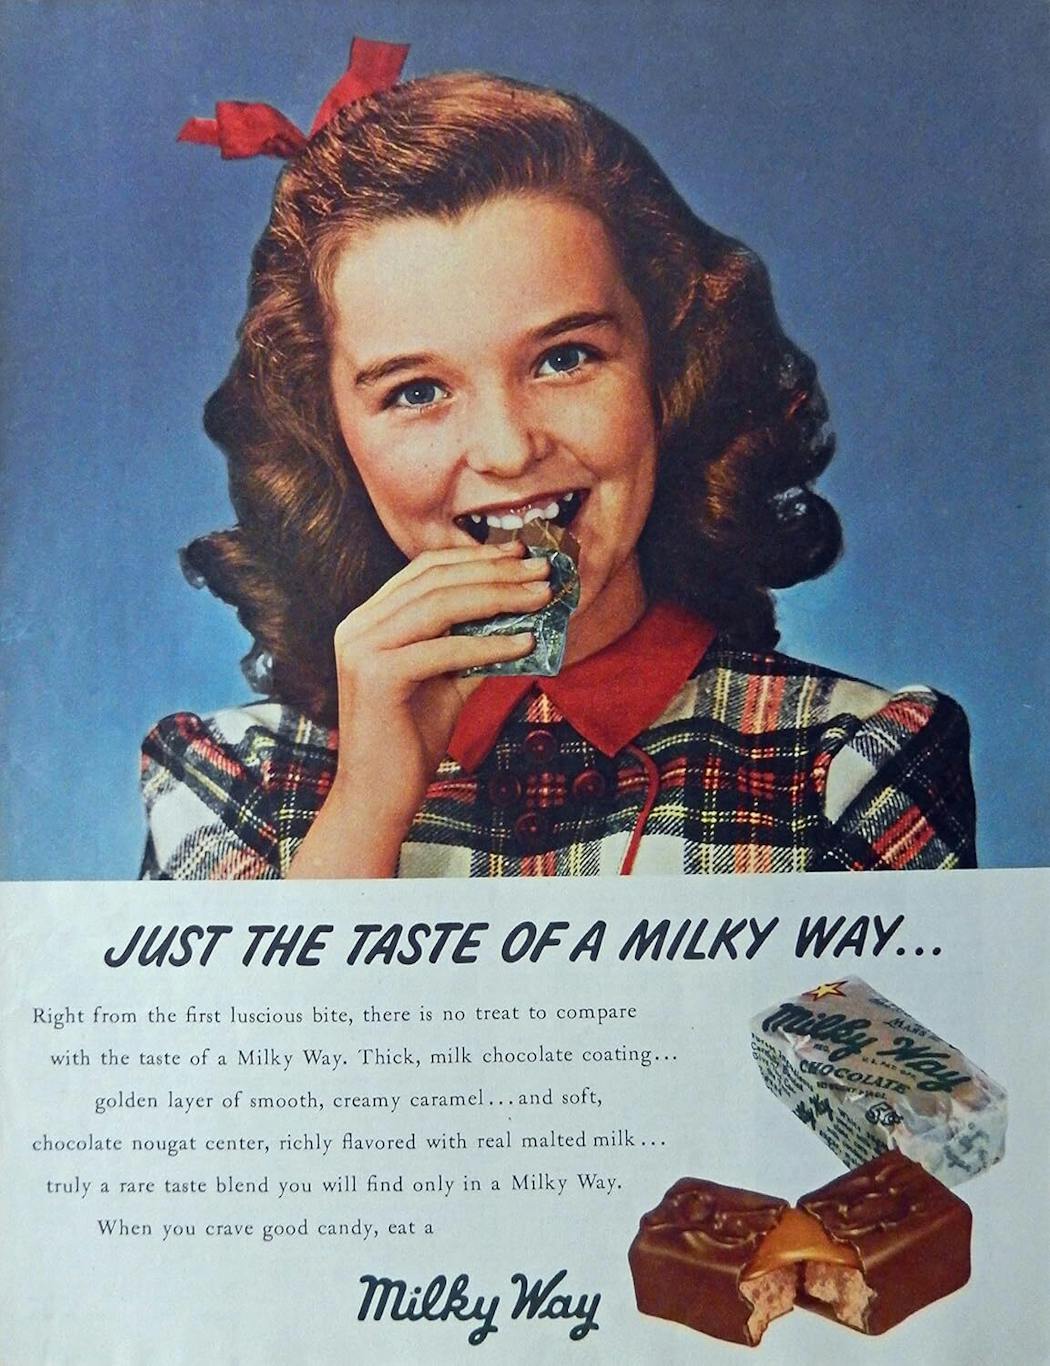 A Milky Way ad from 1947.